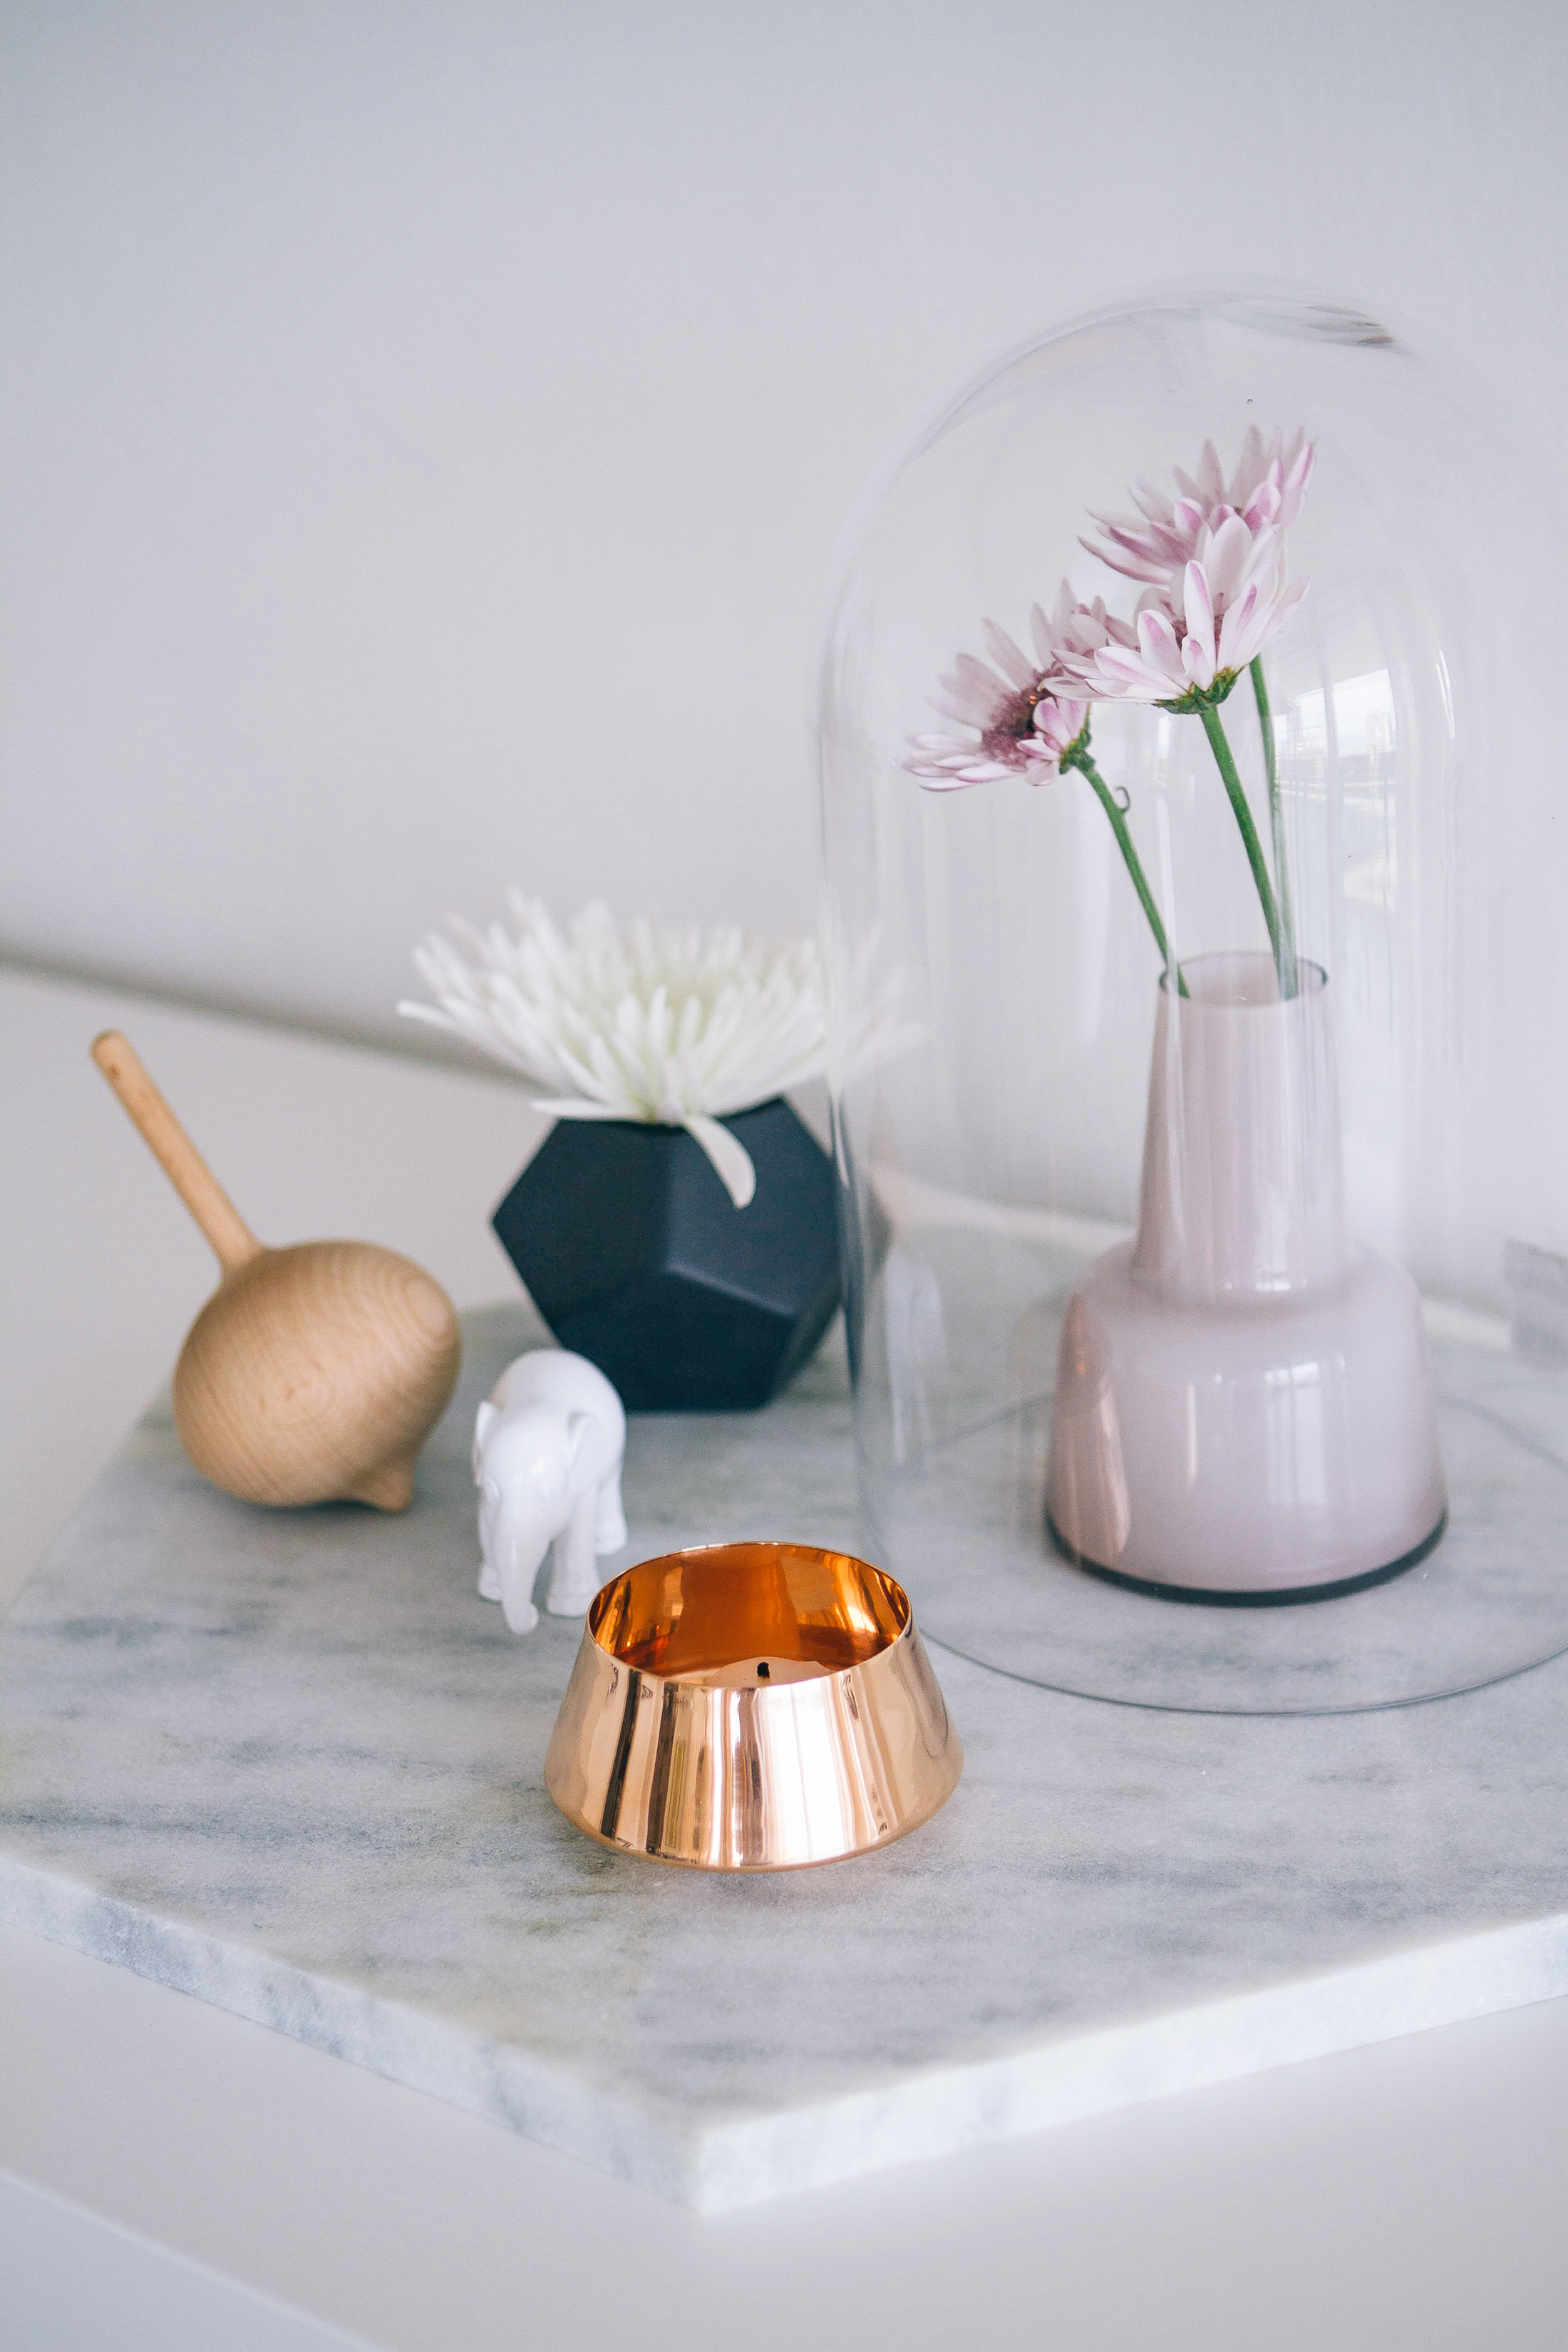 Marble tray, copper tea light holder, porcelain elephant, Hay spinning top, black geometric vase, glass dome with flowers 